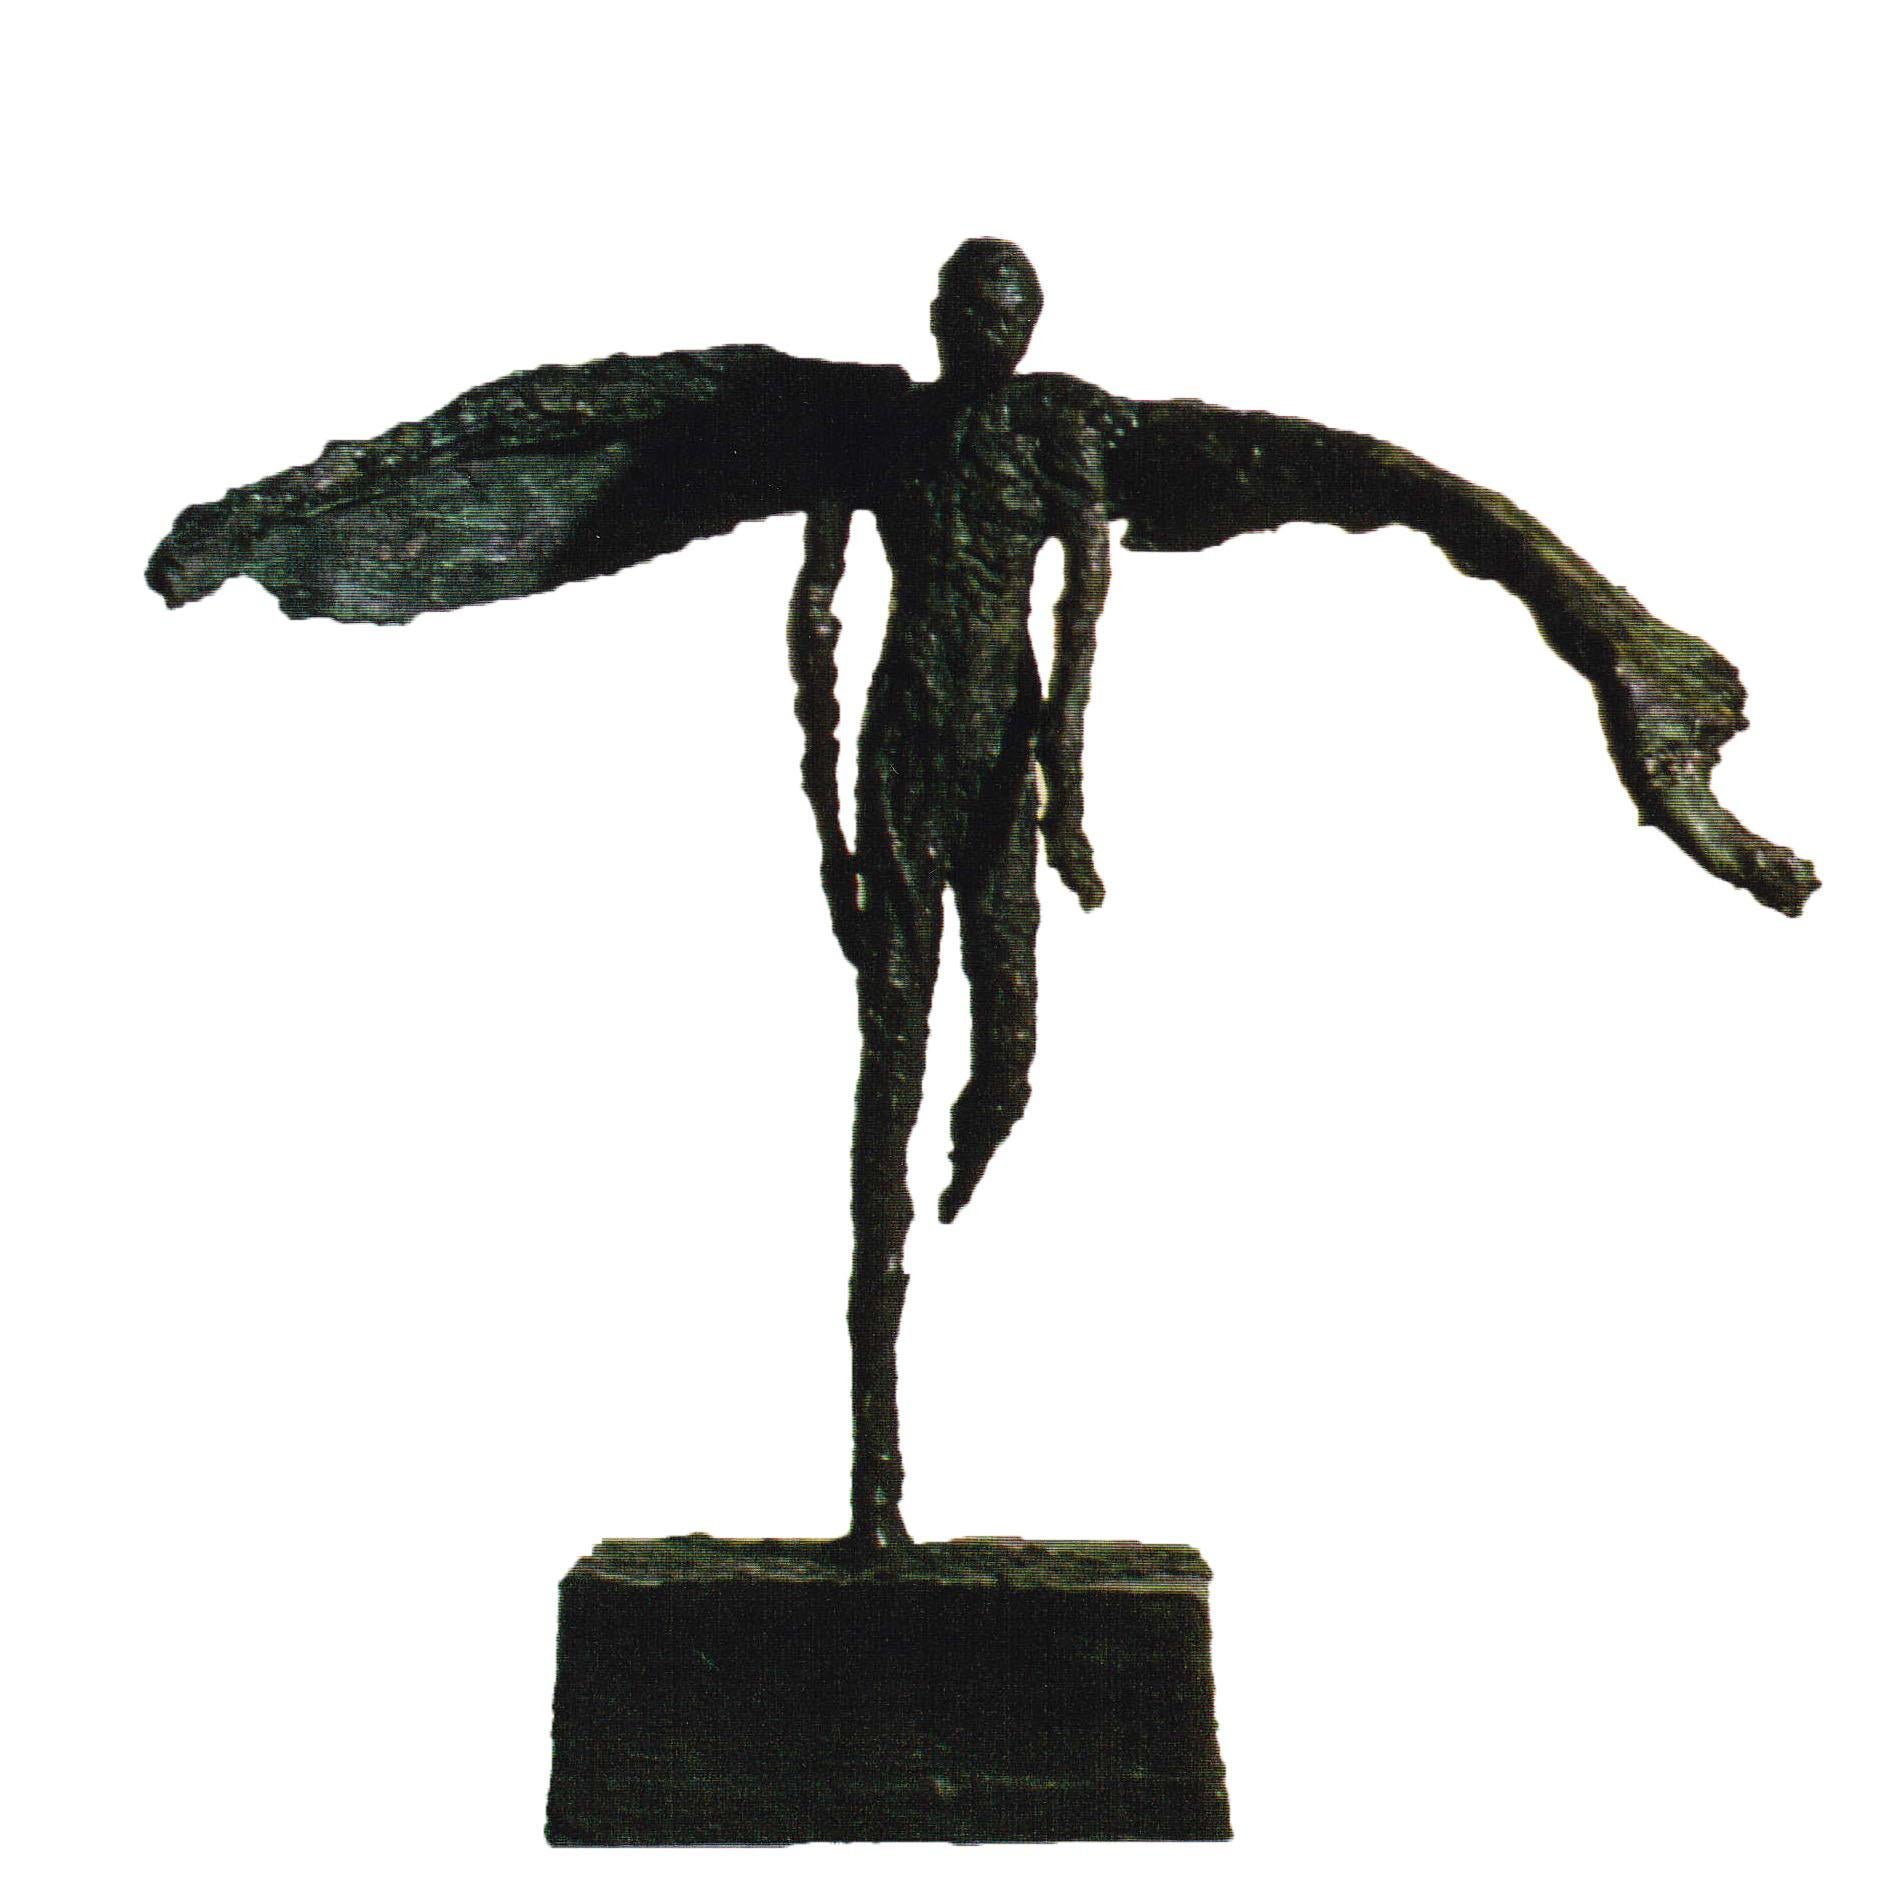 Artist: Emmanuel Okoro
Dimensions (HxWxD):  37 × 33 × 20 cm
Materials: Bronze Resin Sculpture
Edition: 4 of 12
Signed on back
Figurative sculpture of Angel / Man with wings 
Okoro pares down to reveal the essence of a state of being, oneness and